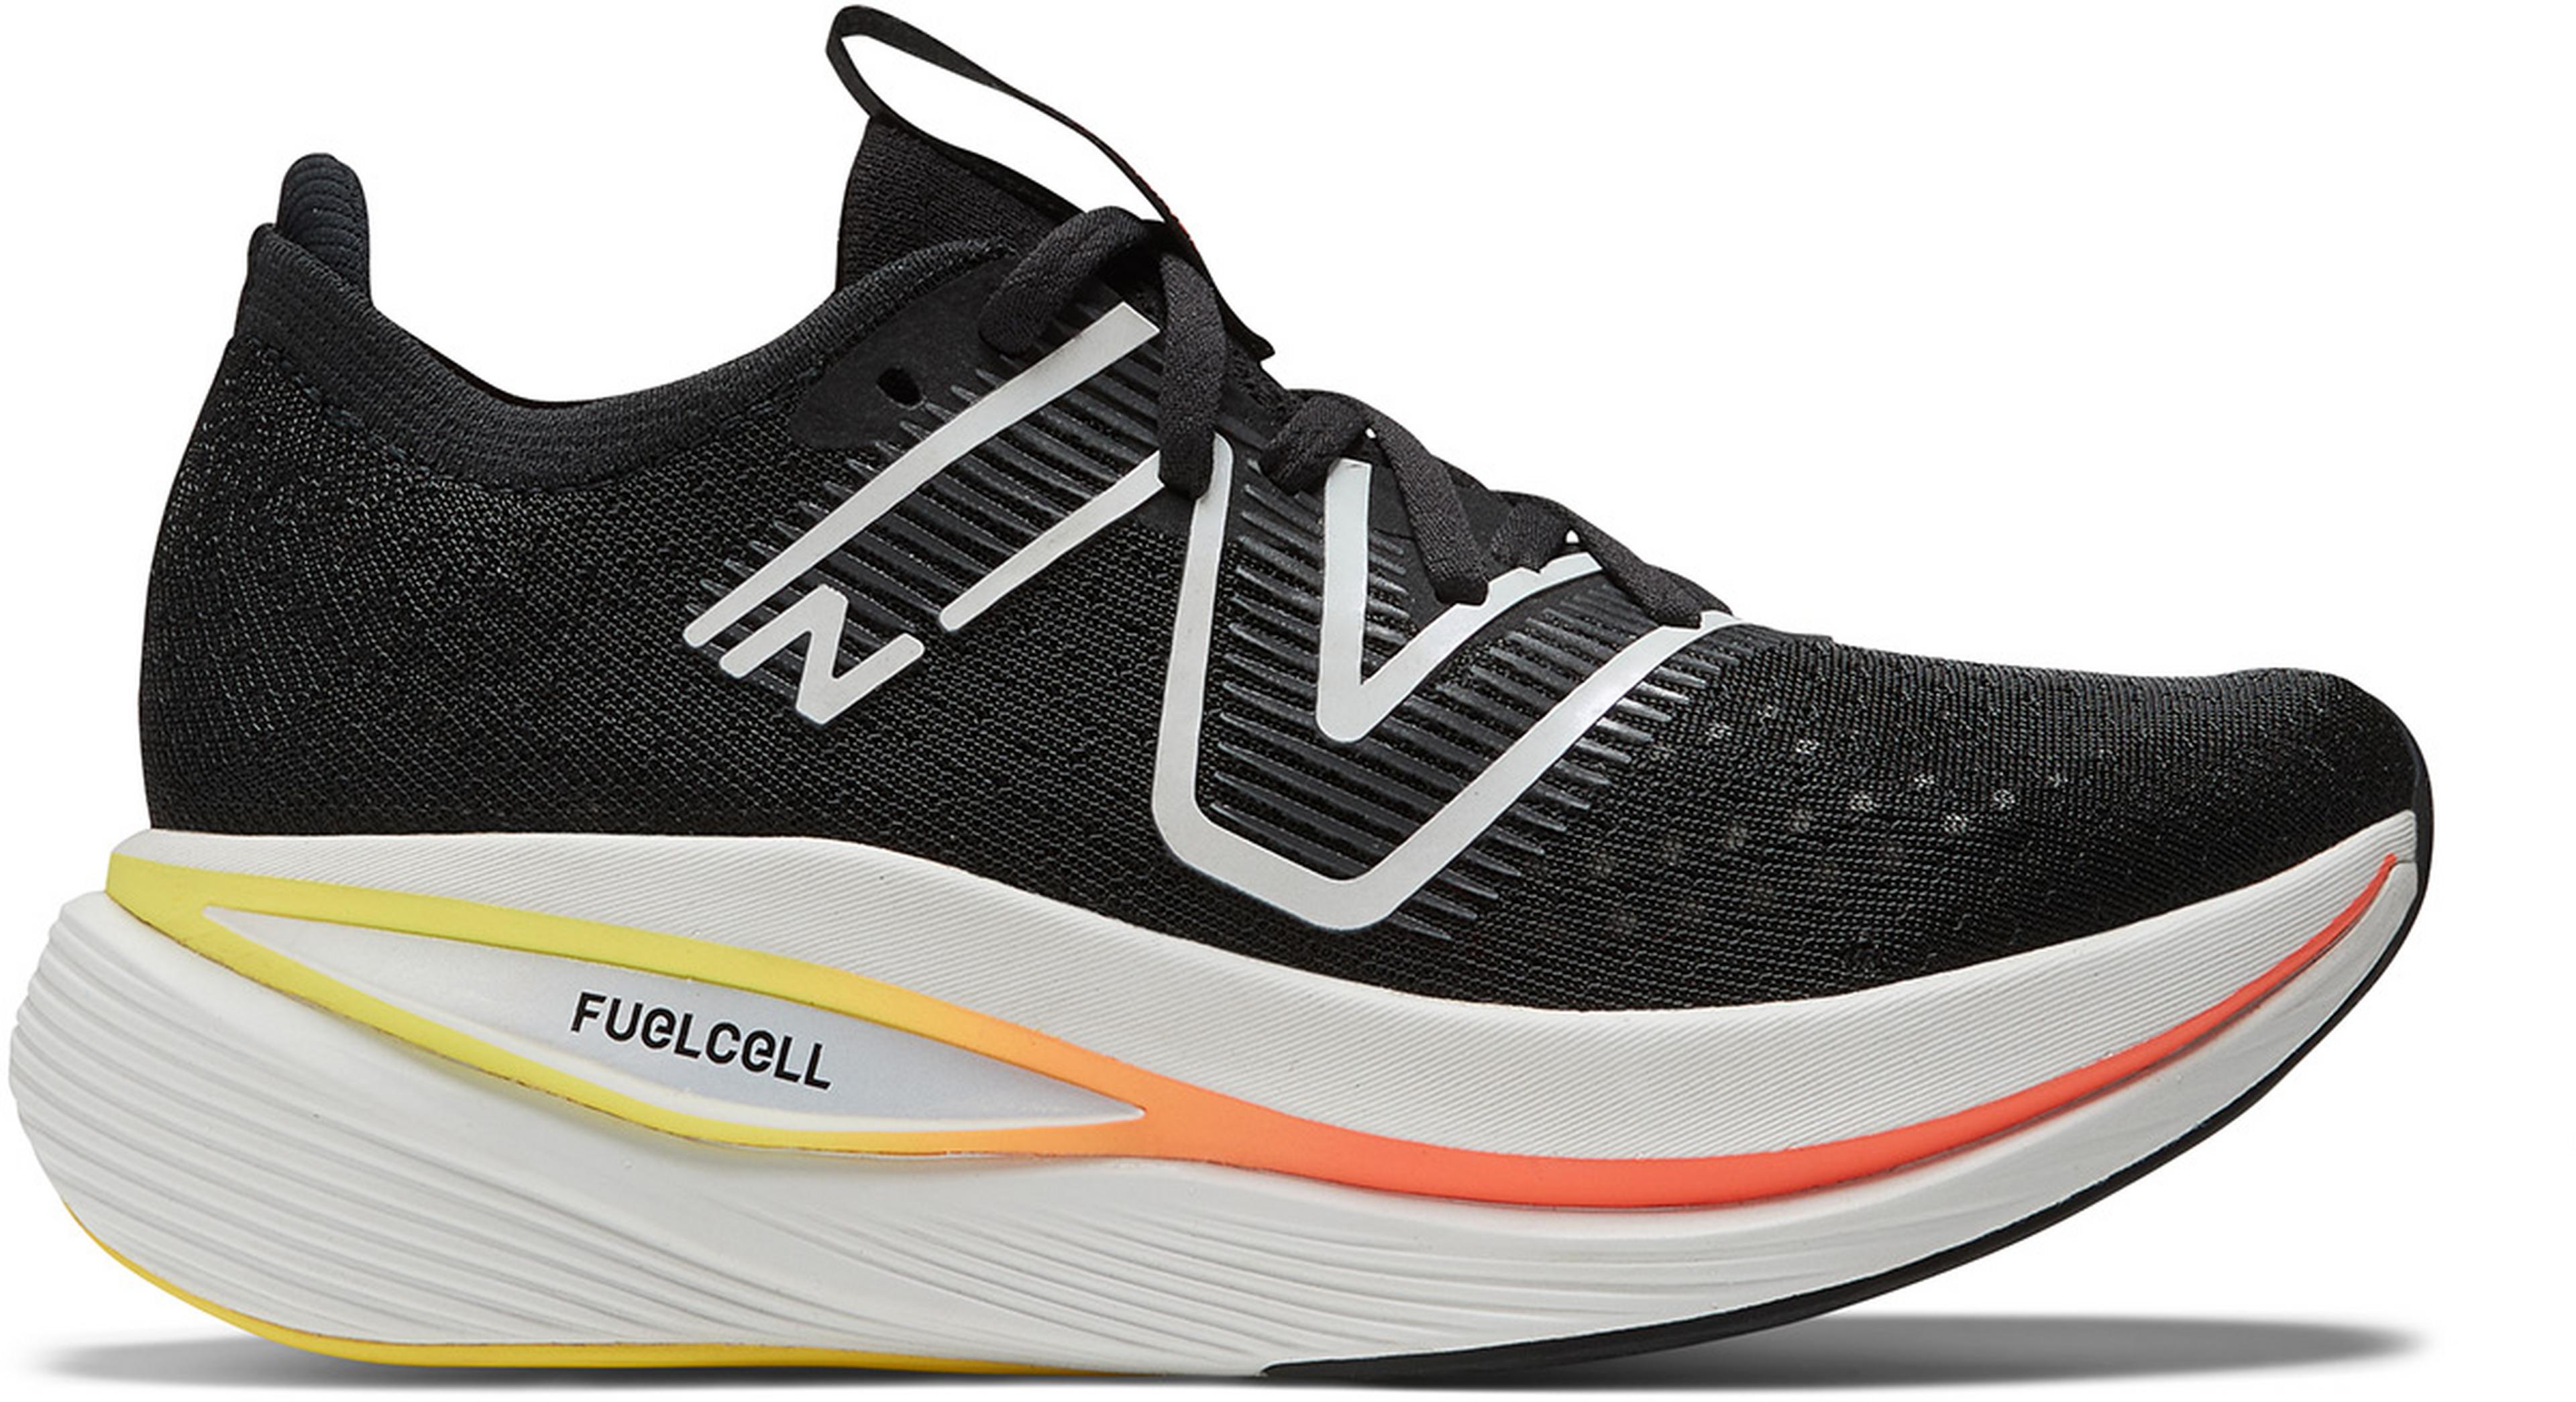 What Are Super-Trainers And Is This Type Of Running Shoe Worth It